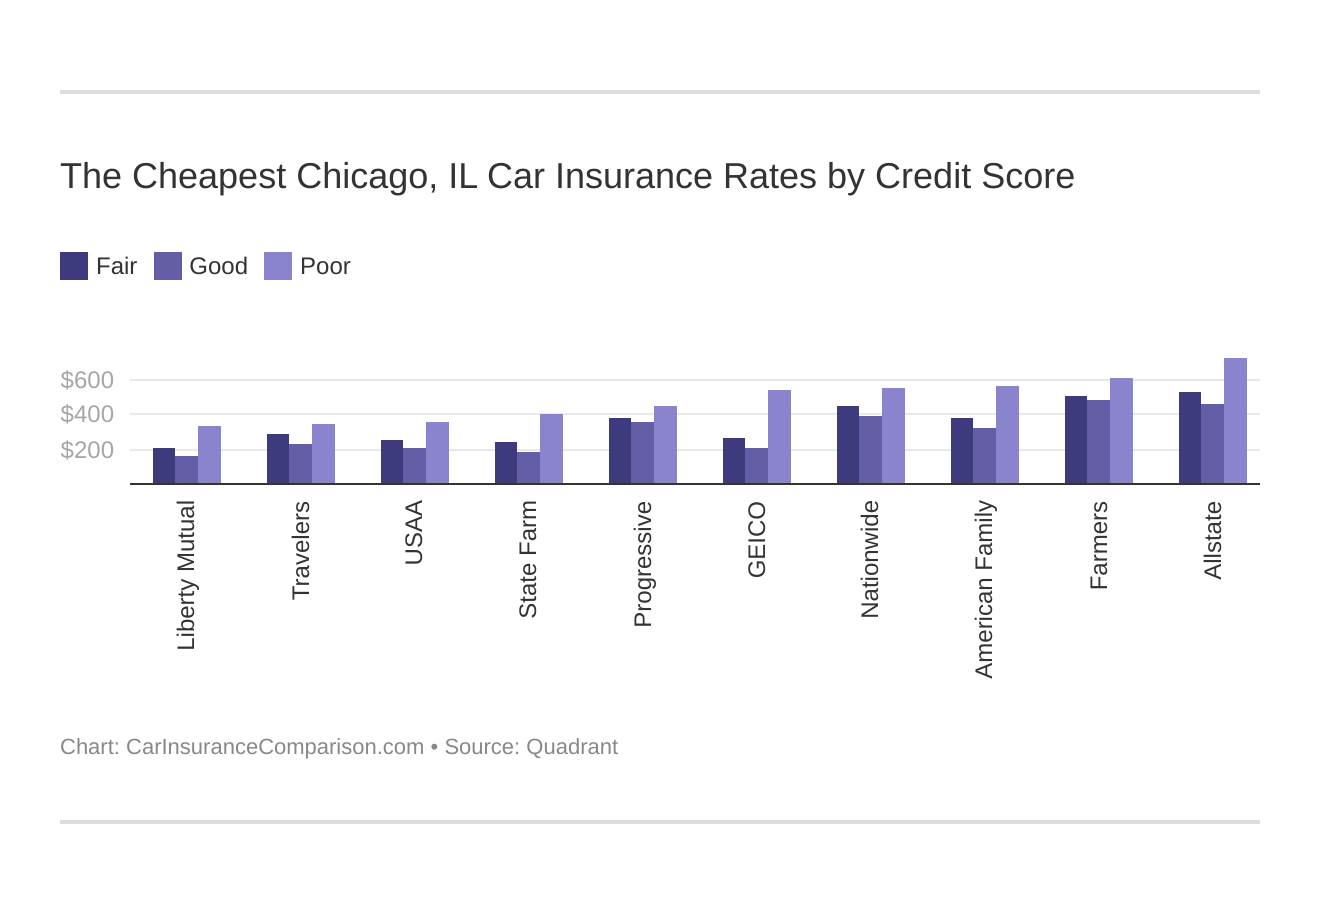 The Cheapest Chicago, IL Car Insurance Rates by Credit Score